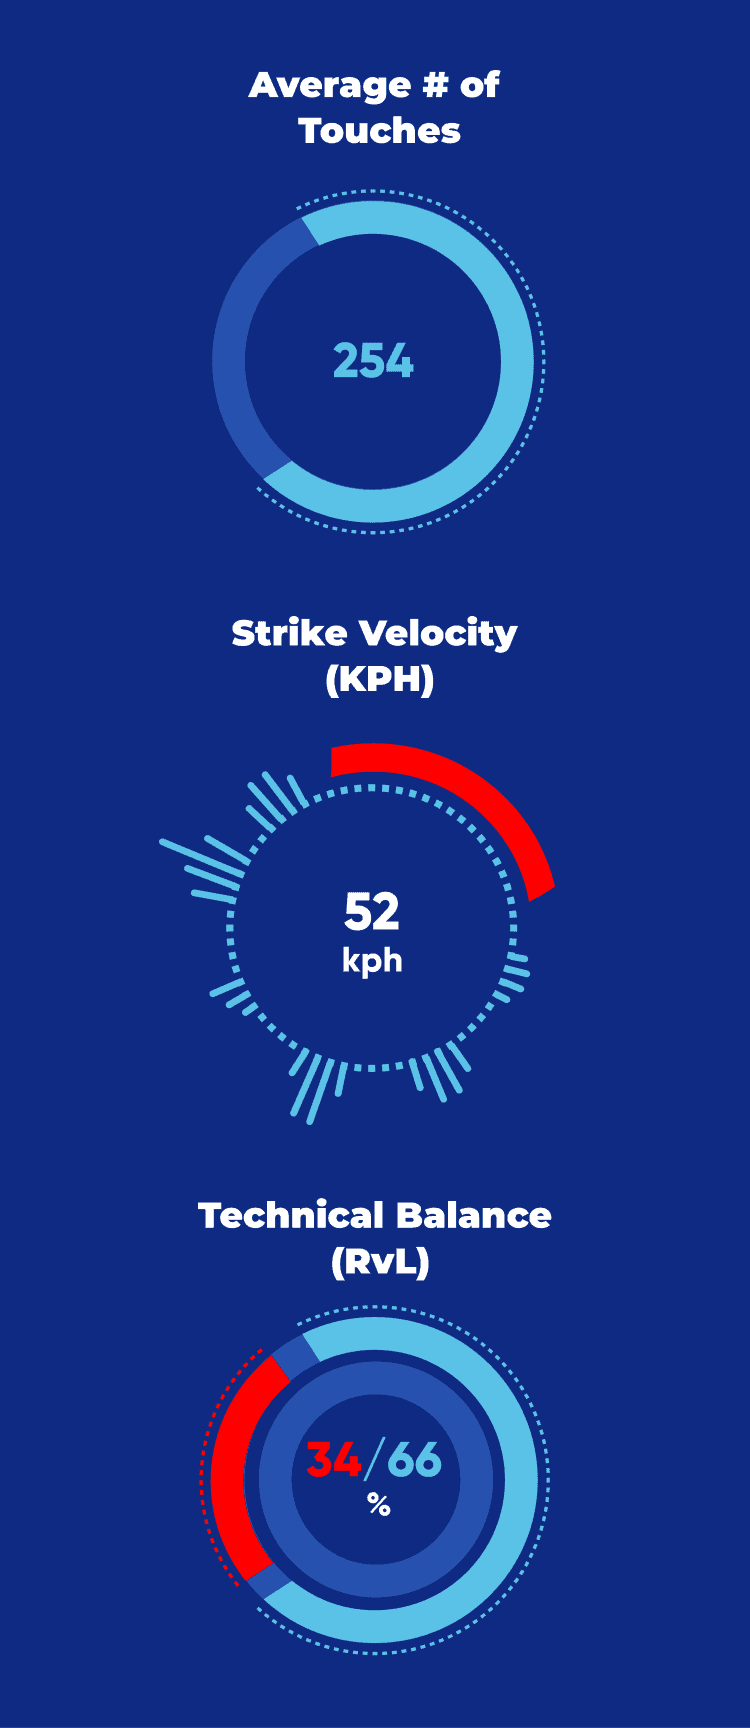 Indicators of average number of touches, strike velocity and technical balance